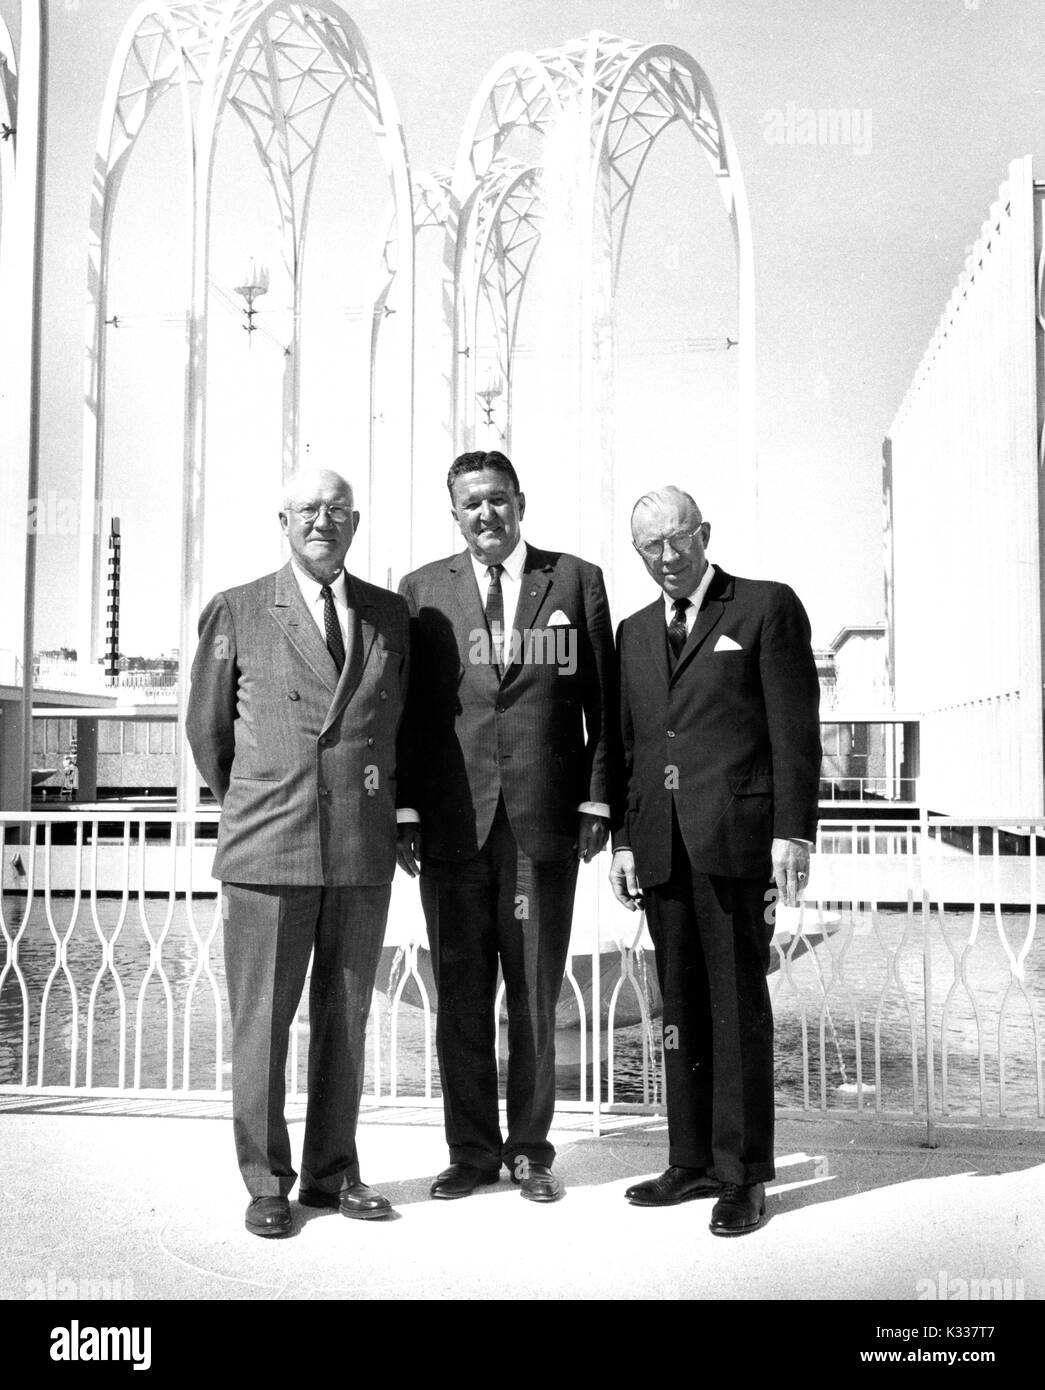 Group photograph of Johns Hopkins University President Milton S. Eisenhower (right), his brother Edgar N. Eisenhower (center), and Seattle attorney and public figure Joseph Edward Gandy (left) standing in front of arches and a fountain at the 1962 Seattle World's Fair, 1962. Stock Photo